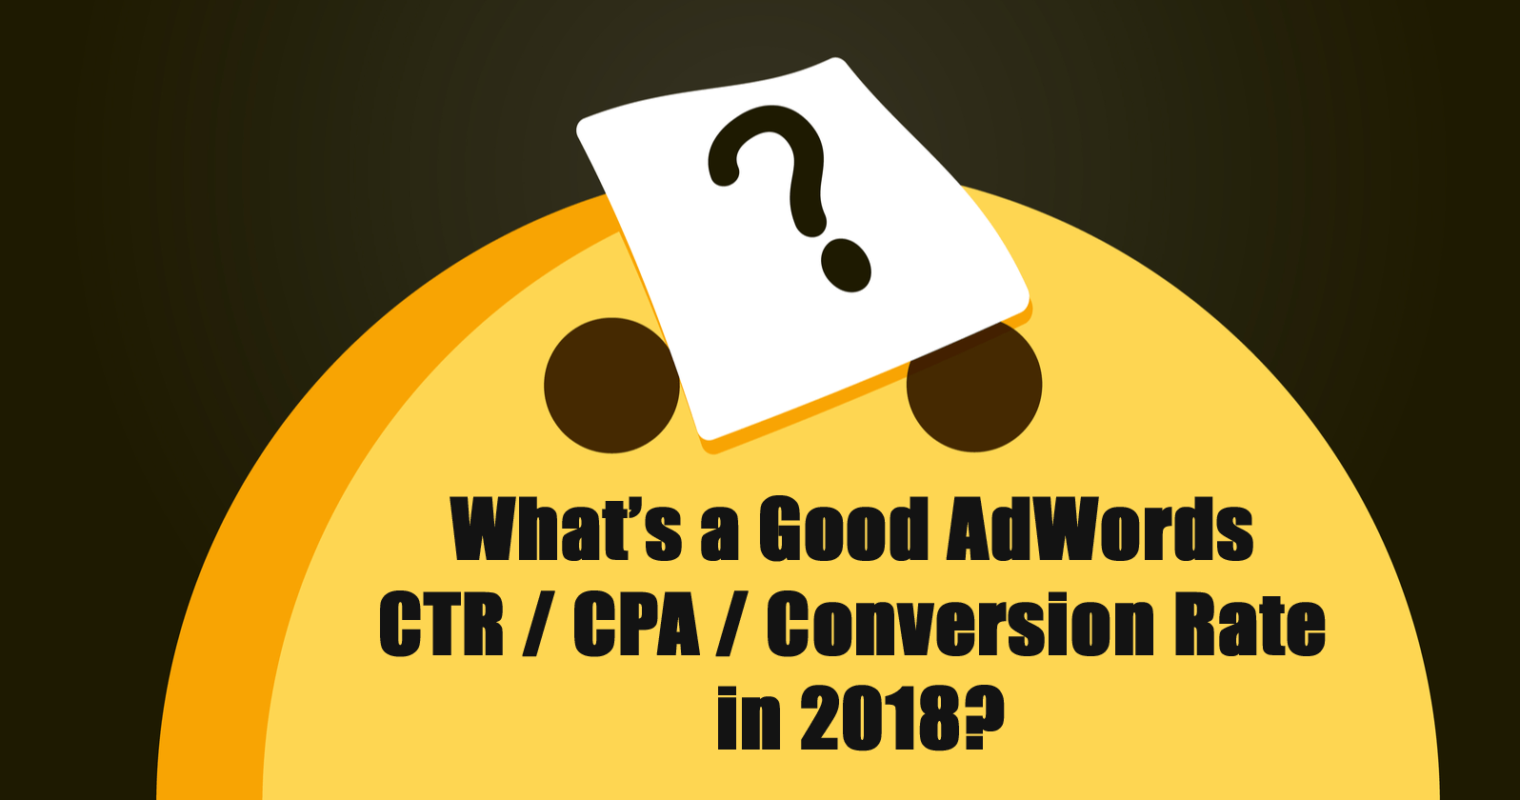 [DATA] What’s a Good AdWords CTR/CPA/Conversion Rate in 2018?